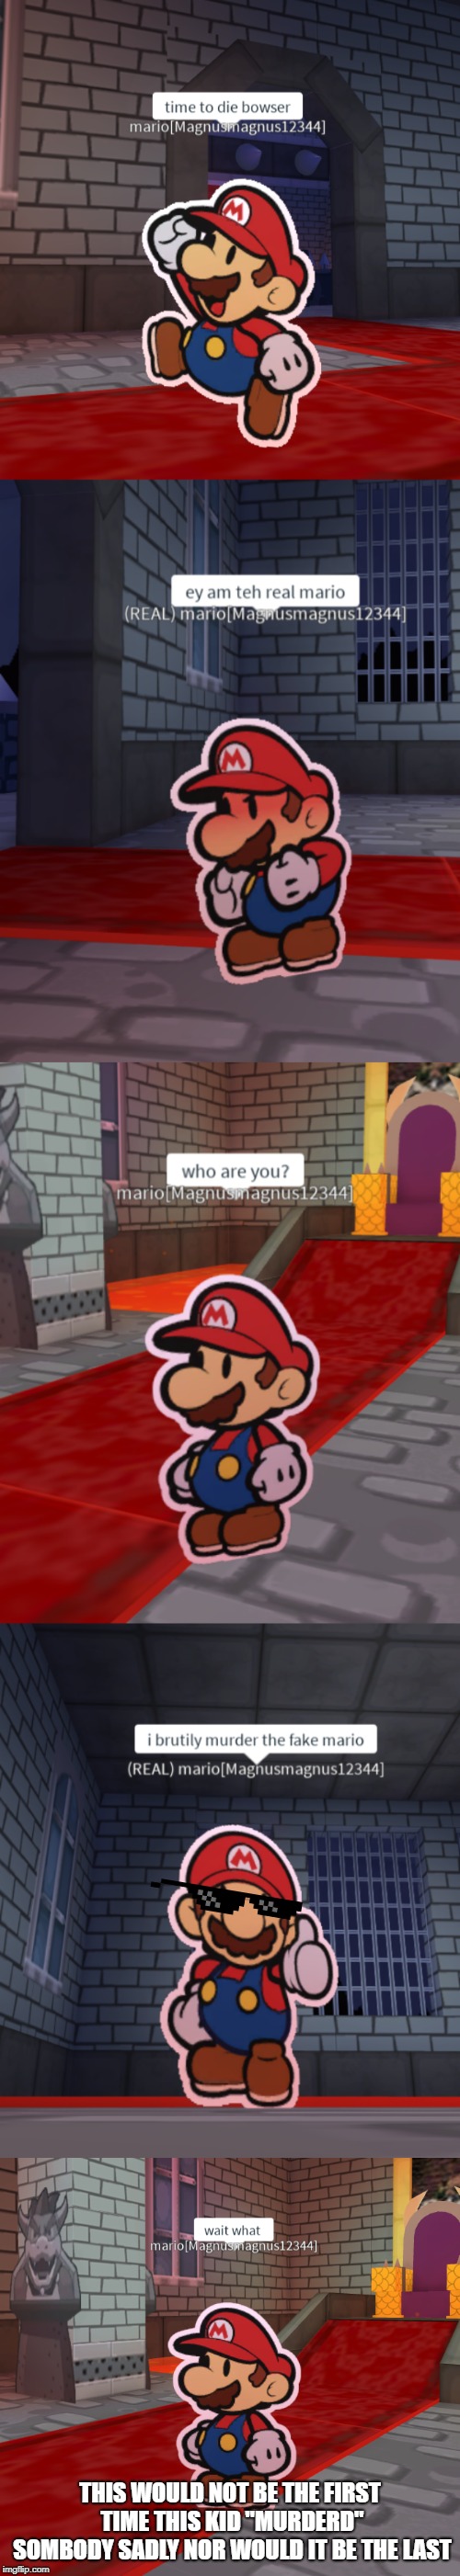 the (REAL) mario | THIS WOULD NOT BE THE FIRST TIME THIS KID "MURDERD" SOMBODY SADLY NOR WOULD IT BE THE LAST | image tagged in mario | made w/ Imgflip meme maker